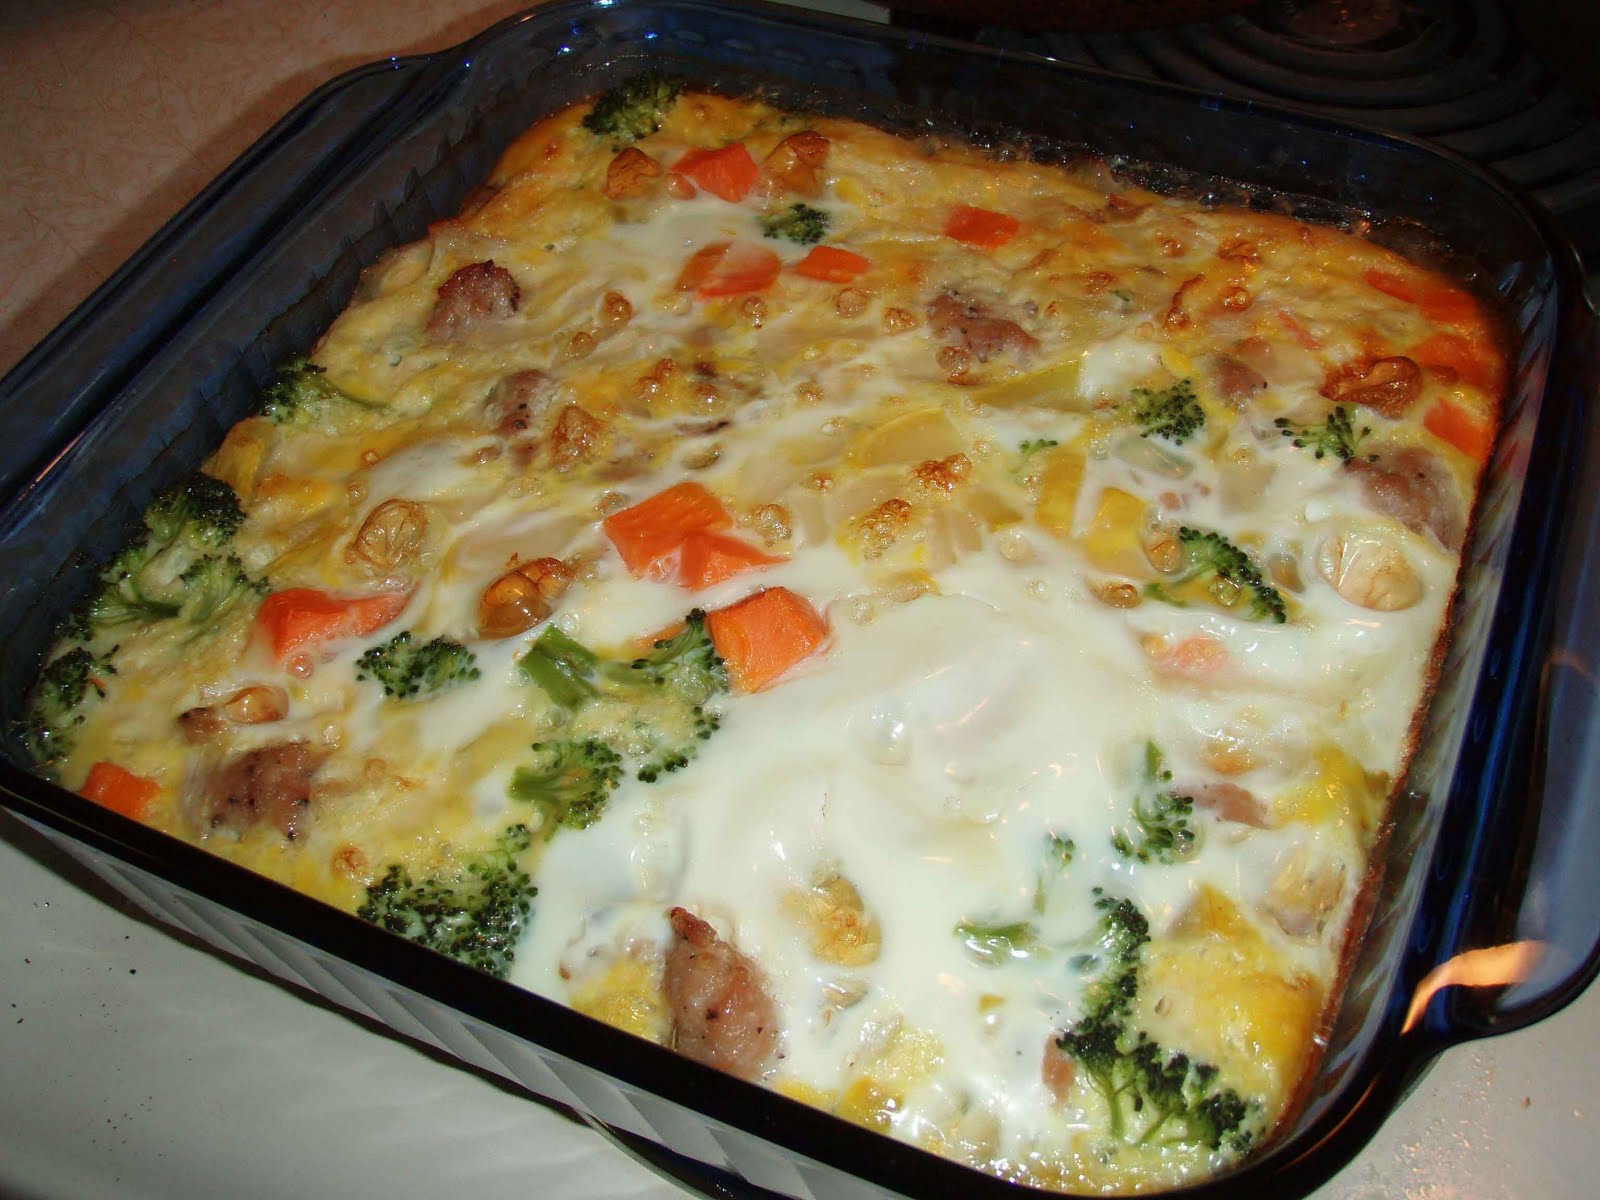 Scooter and Triangle Girl: Sausage and Vegetable Egg Bake